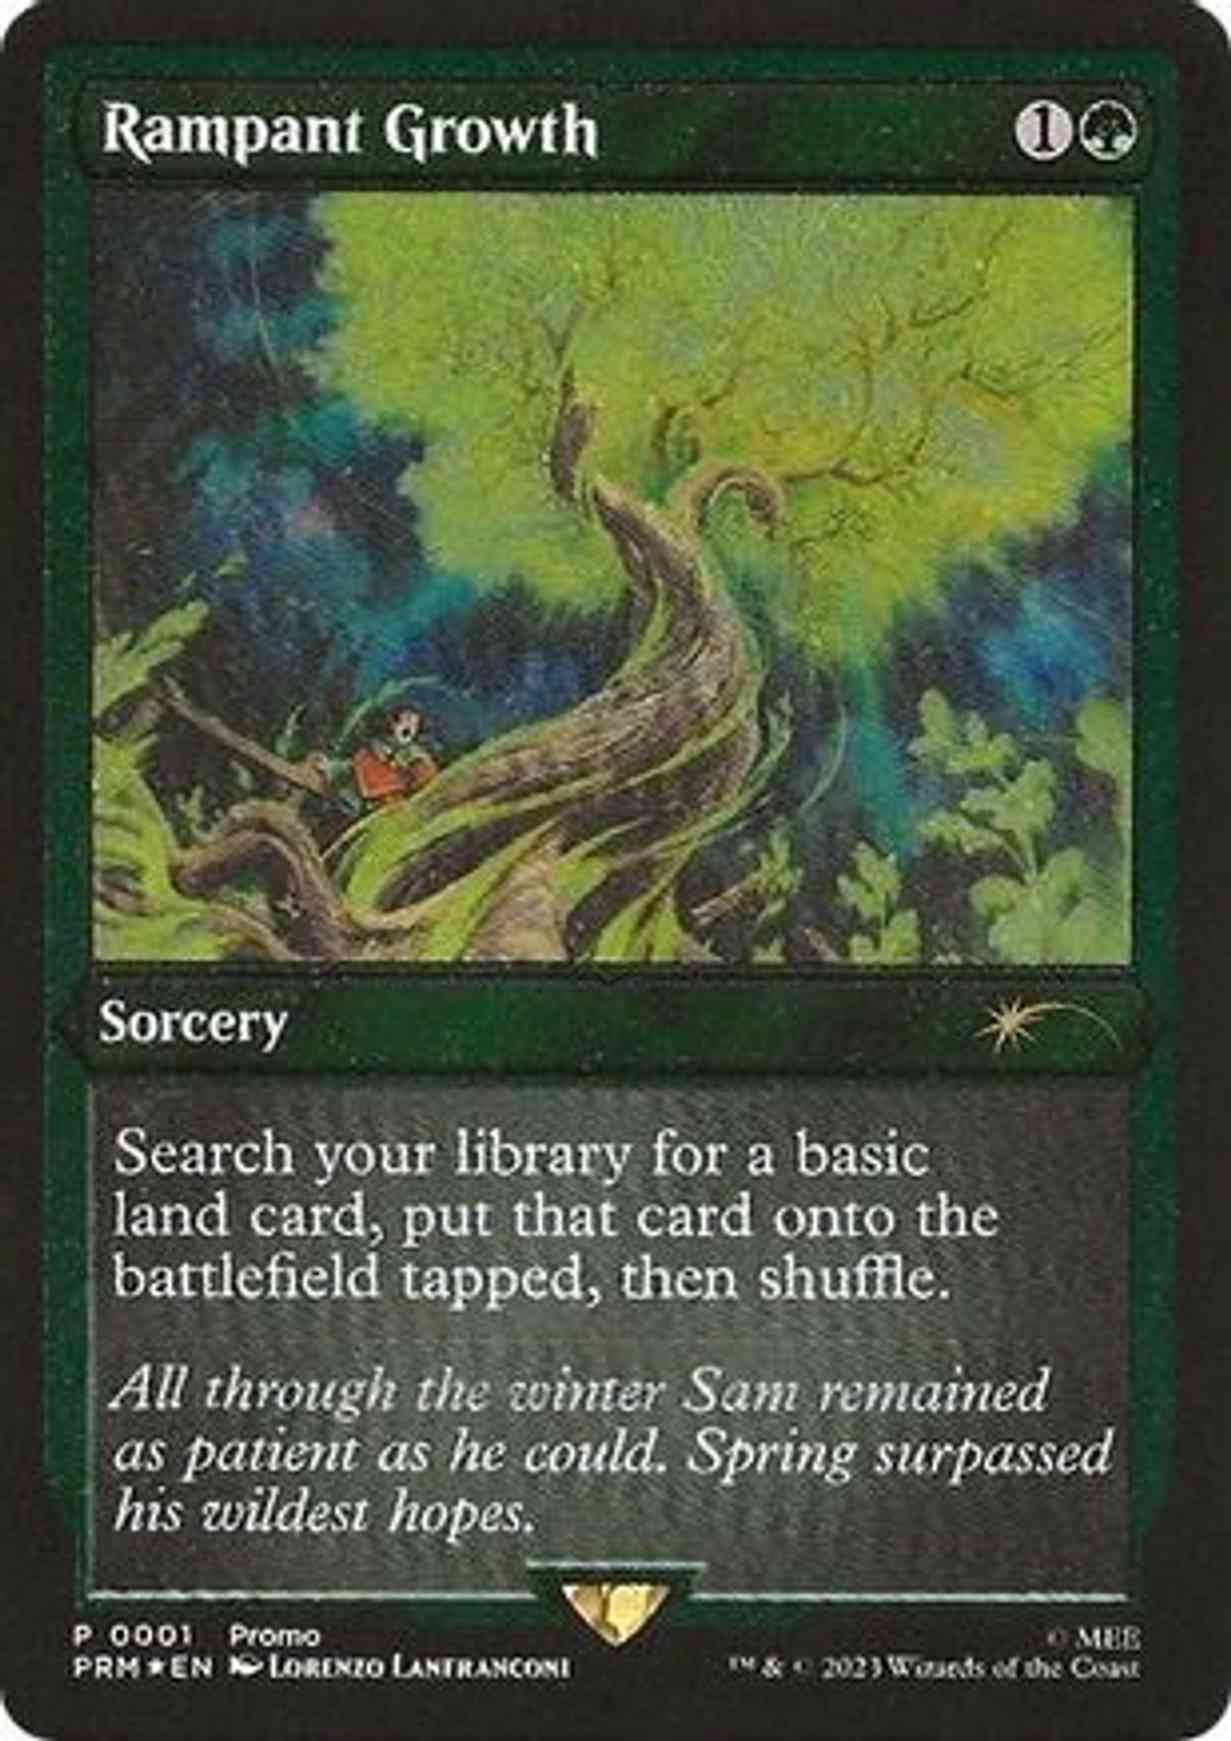 Rampant Growth (Foil Etched) magic card front